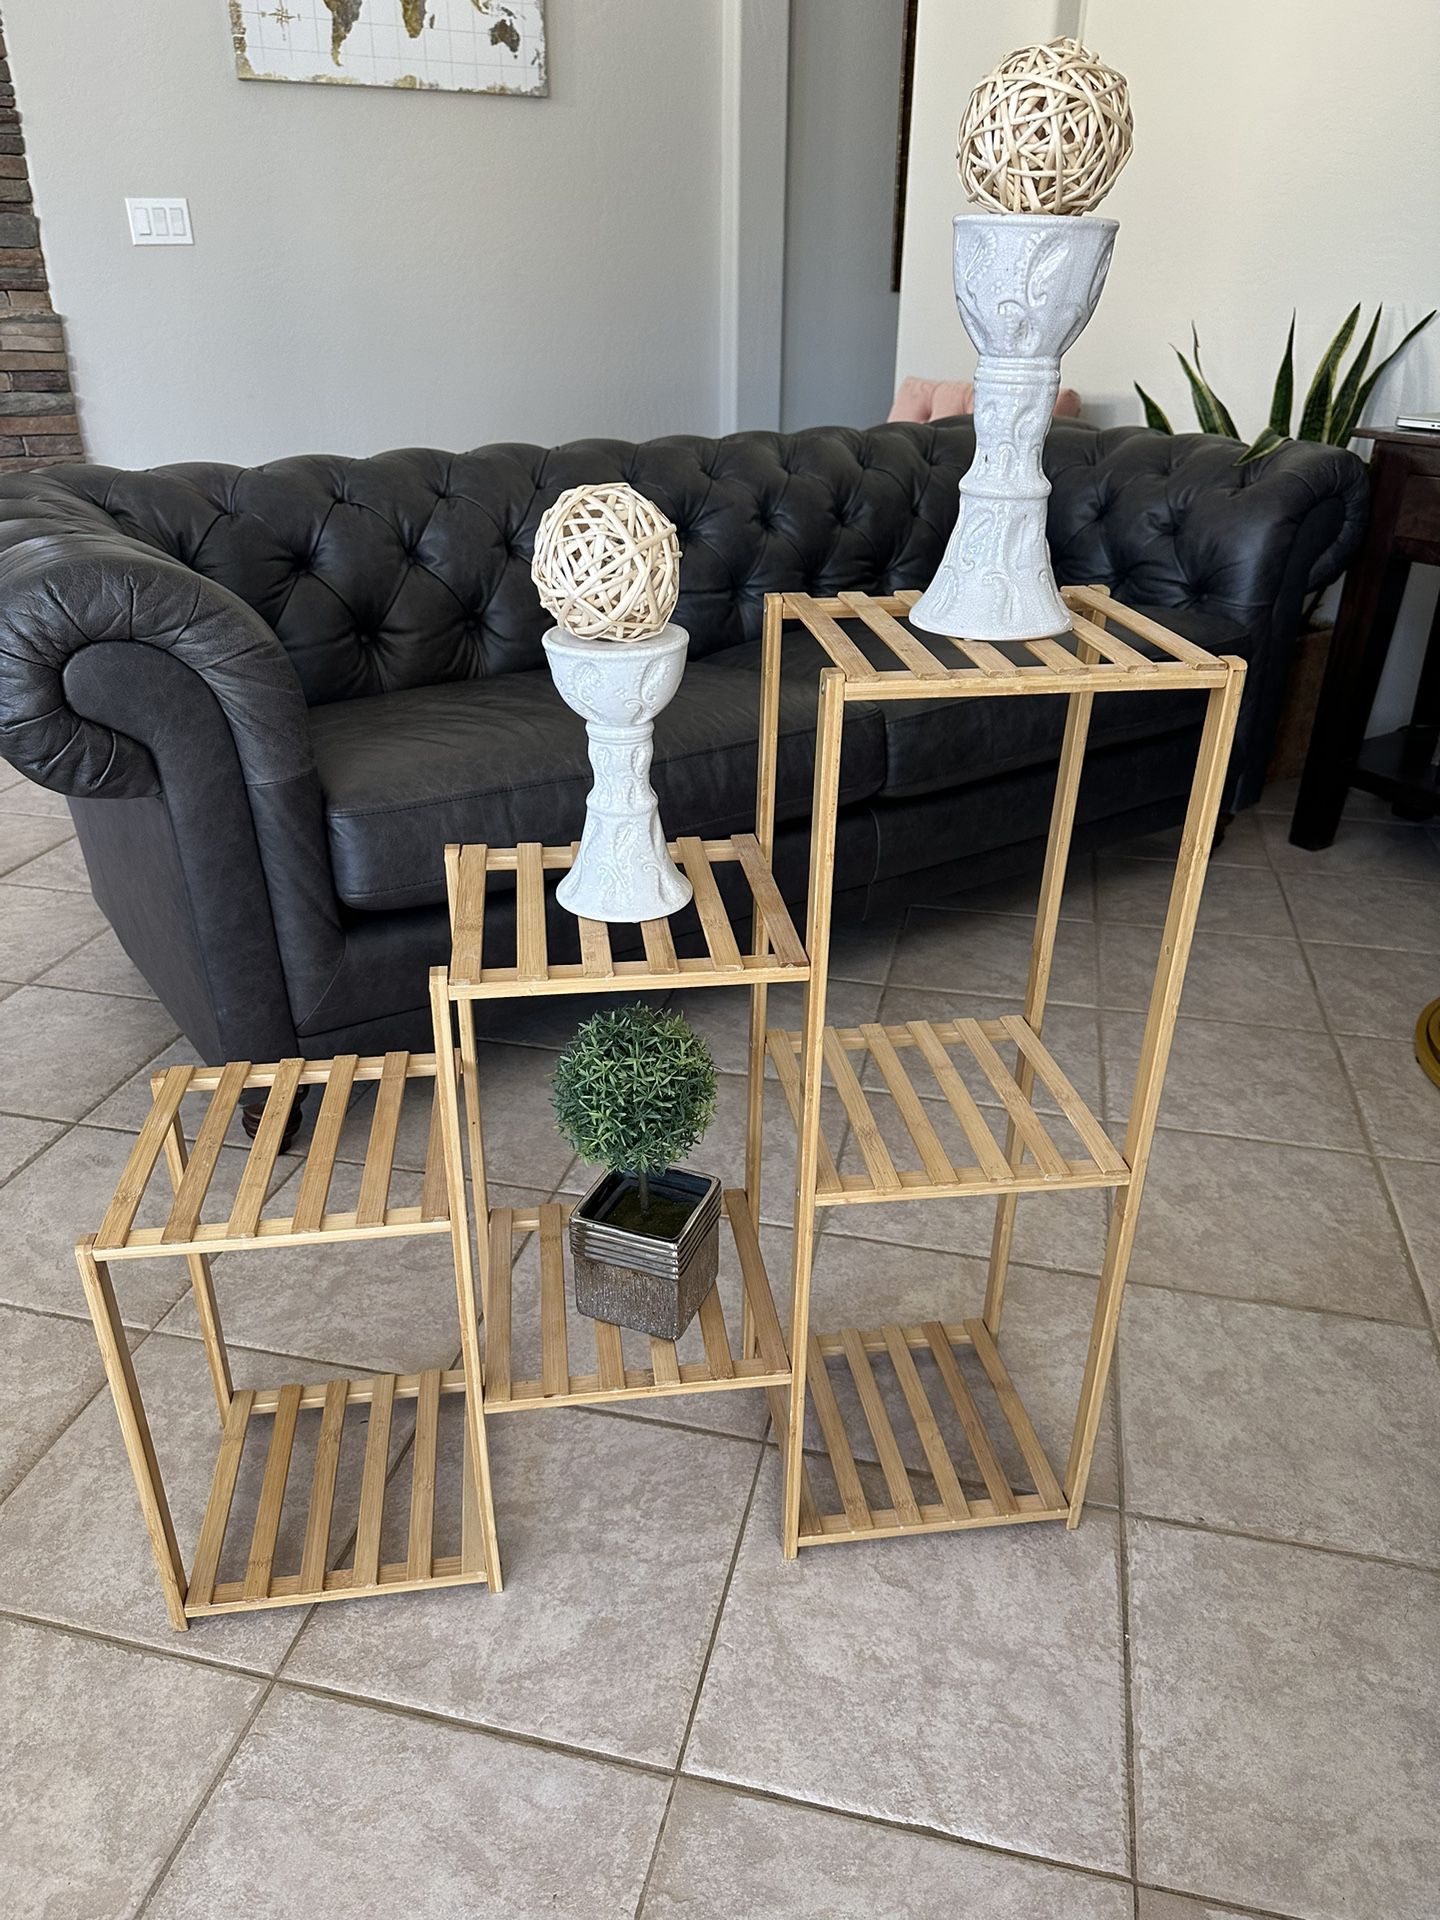 Bamboo Wood Plant Pot Stand Support ( Stand Only ! No Decor Included)